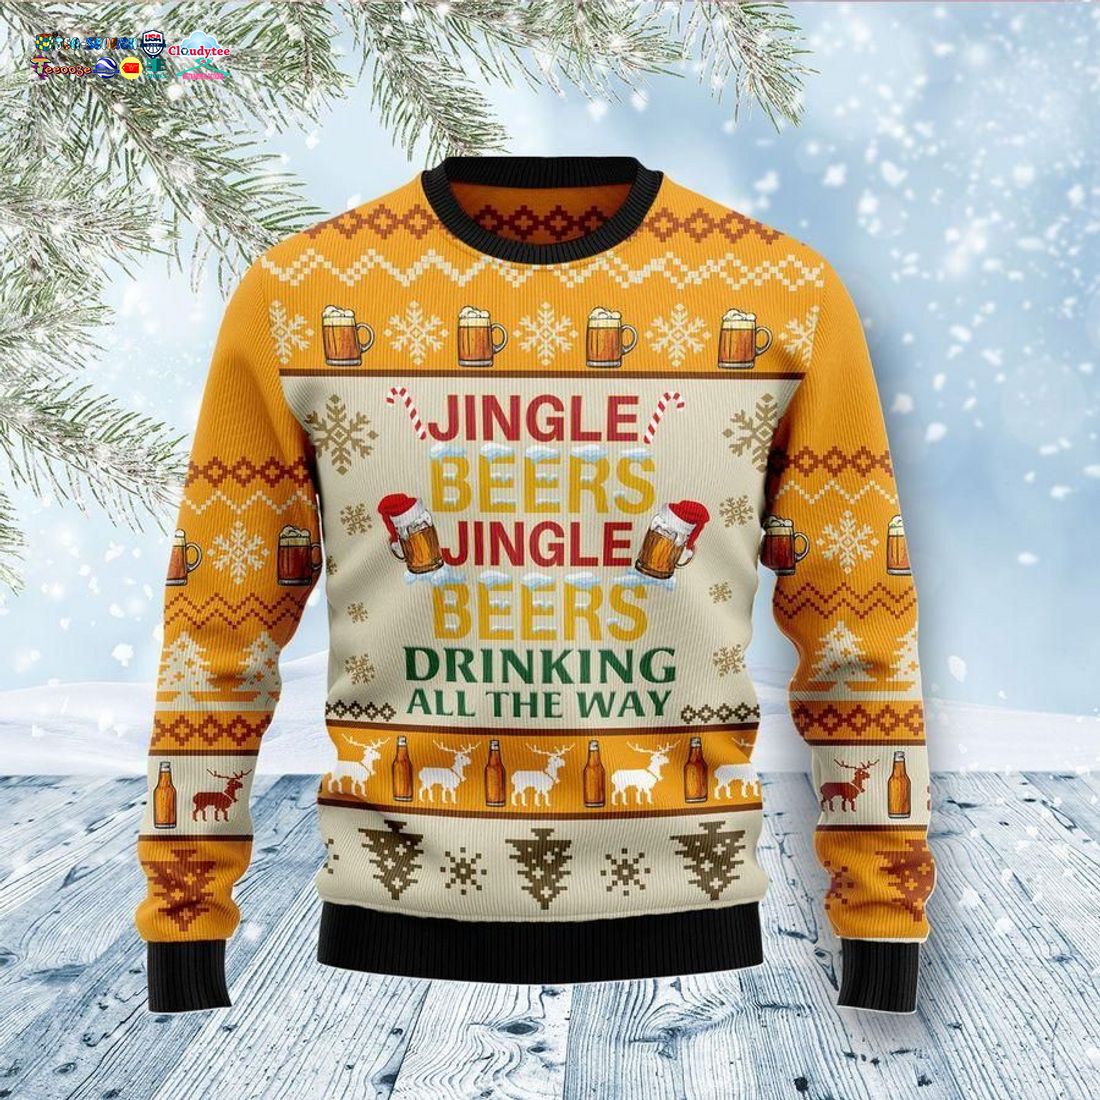 Jingle Beers Jingle Beers Drinking All The Way Ver 2 Ugly Christmas Sweater